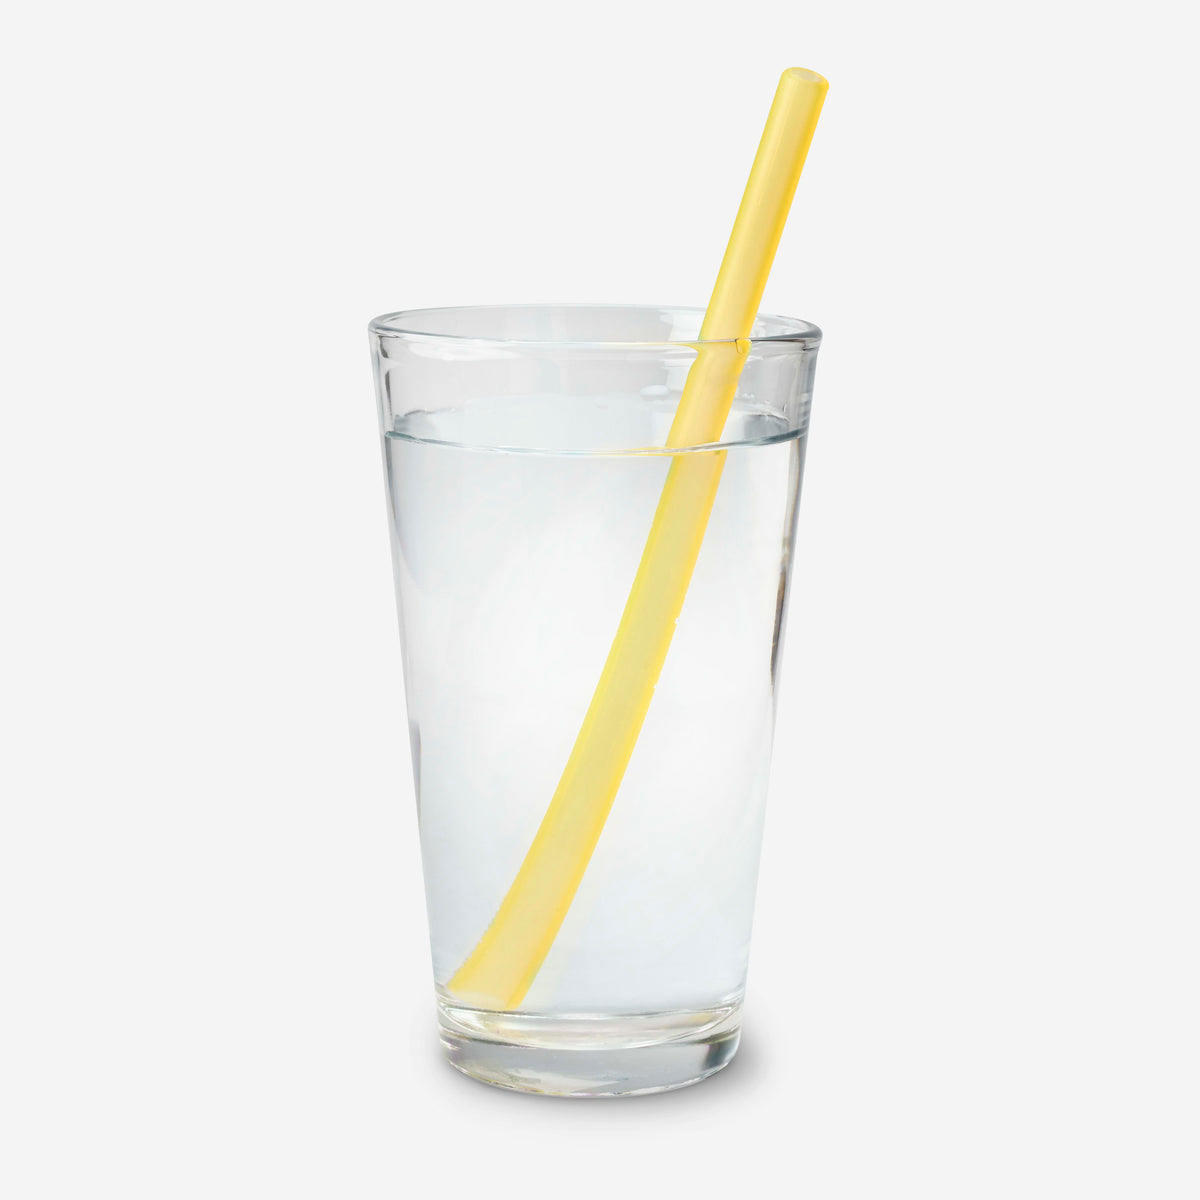 GoSili® 8 Silicone Straw Pack, Eco-Friendly, Soft Reusable Drinking S